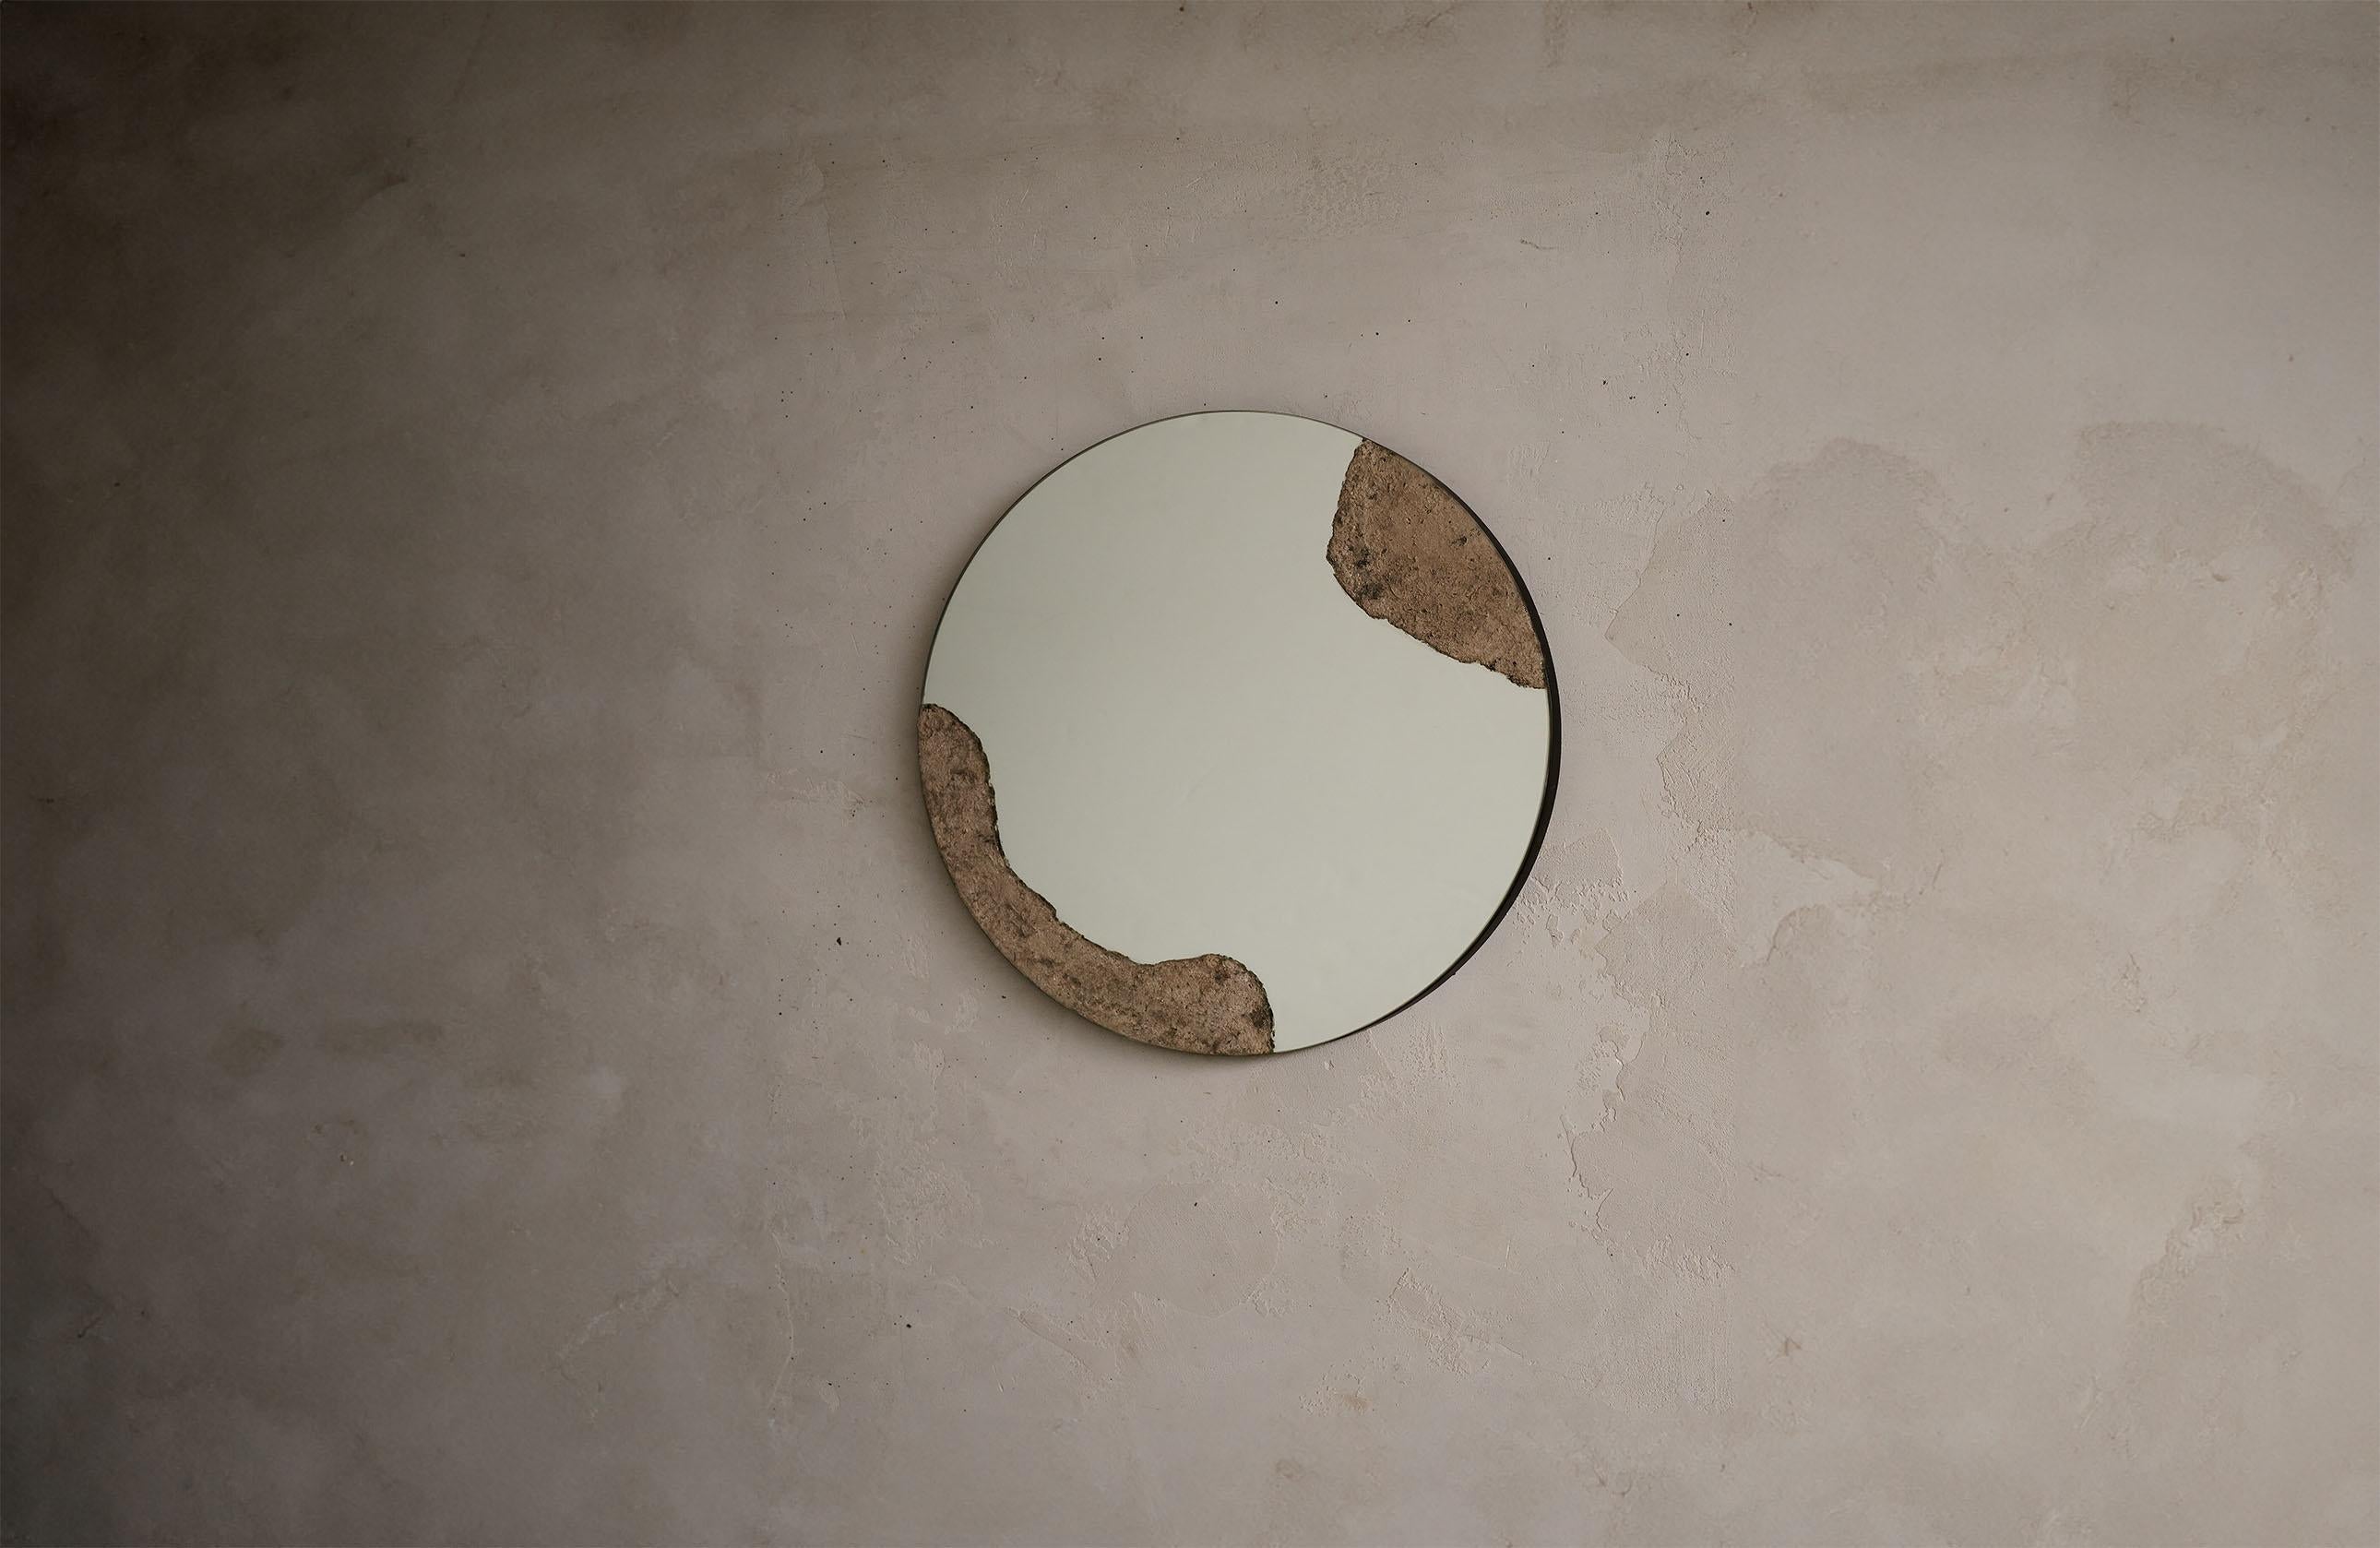 The Pompeii Round Mirror consists of burnt ash that is hand-spread and worked.

*Burnt Ash shape and color is organic and may differ from piece to piece to keep uniqueness in the artists own hand and technique.